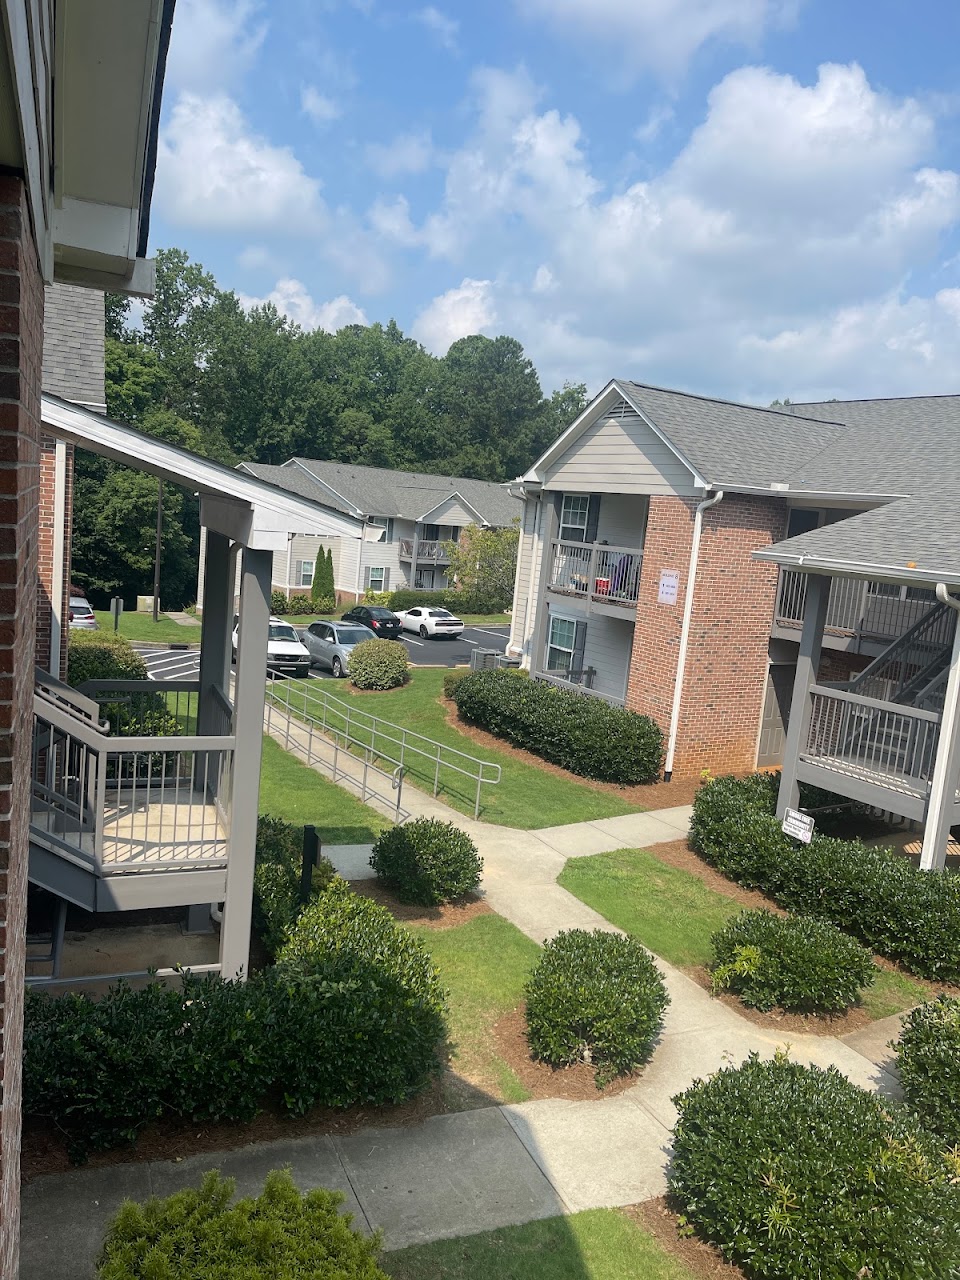 Photo of THE VIEW AT SUGARLOAF AKA TANGLEWOOD HEIGHTS. Affordable housing located at 5355 SUGARLOAF PKWY LAWRENCEVILLE, GA 30043